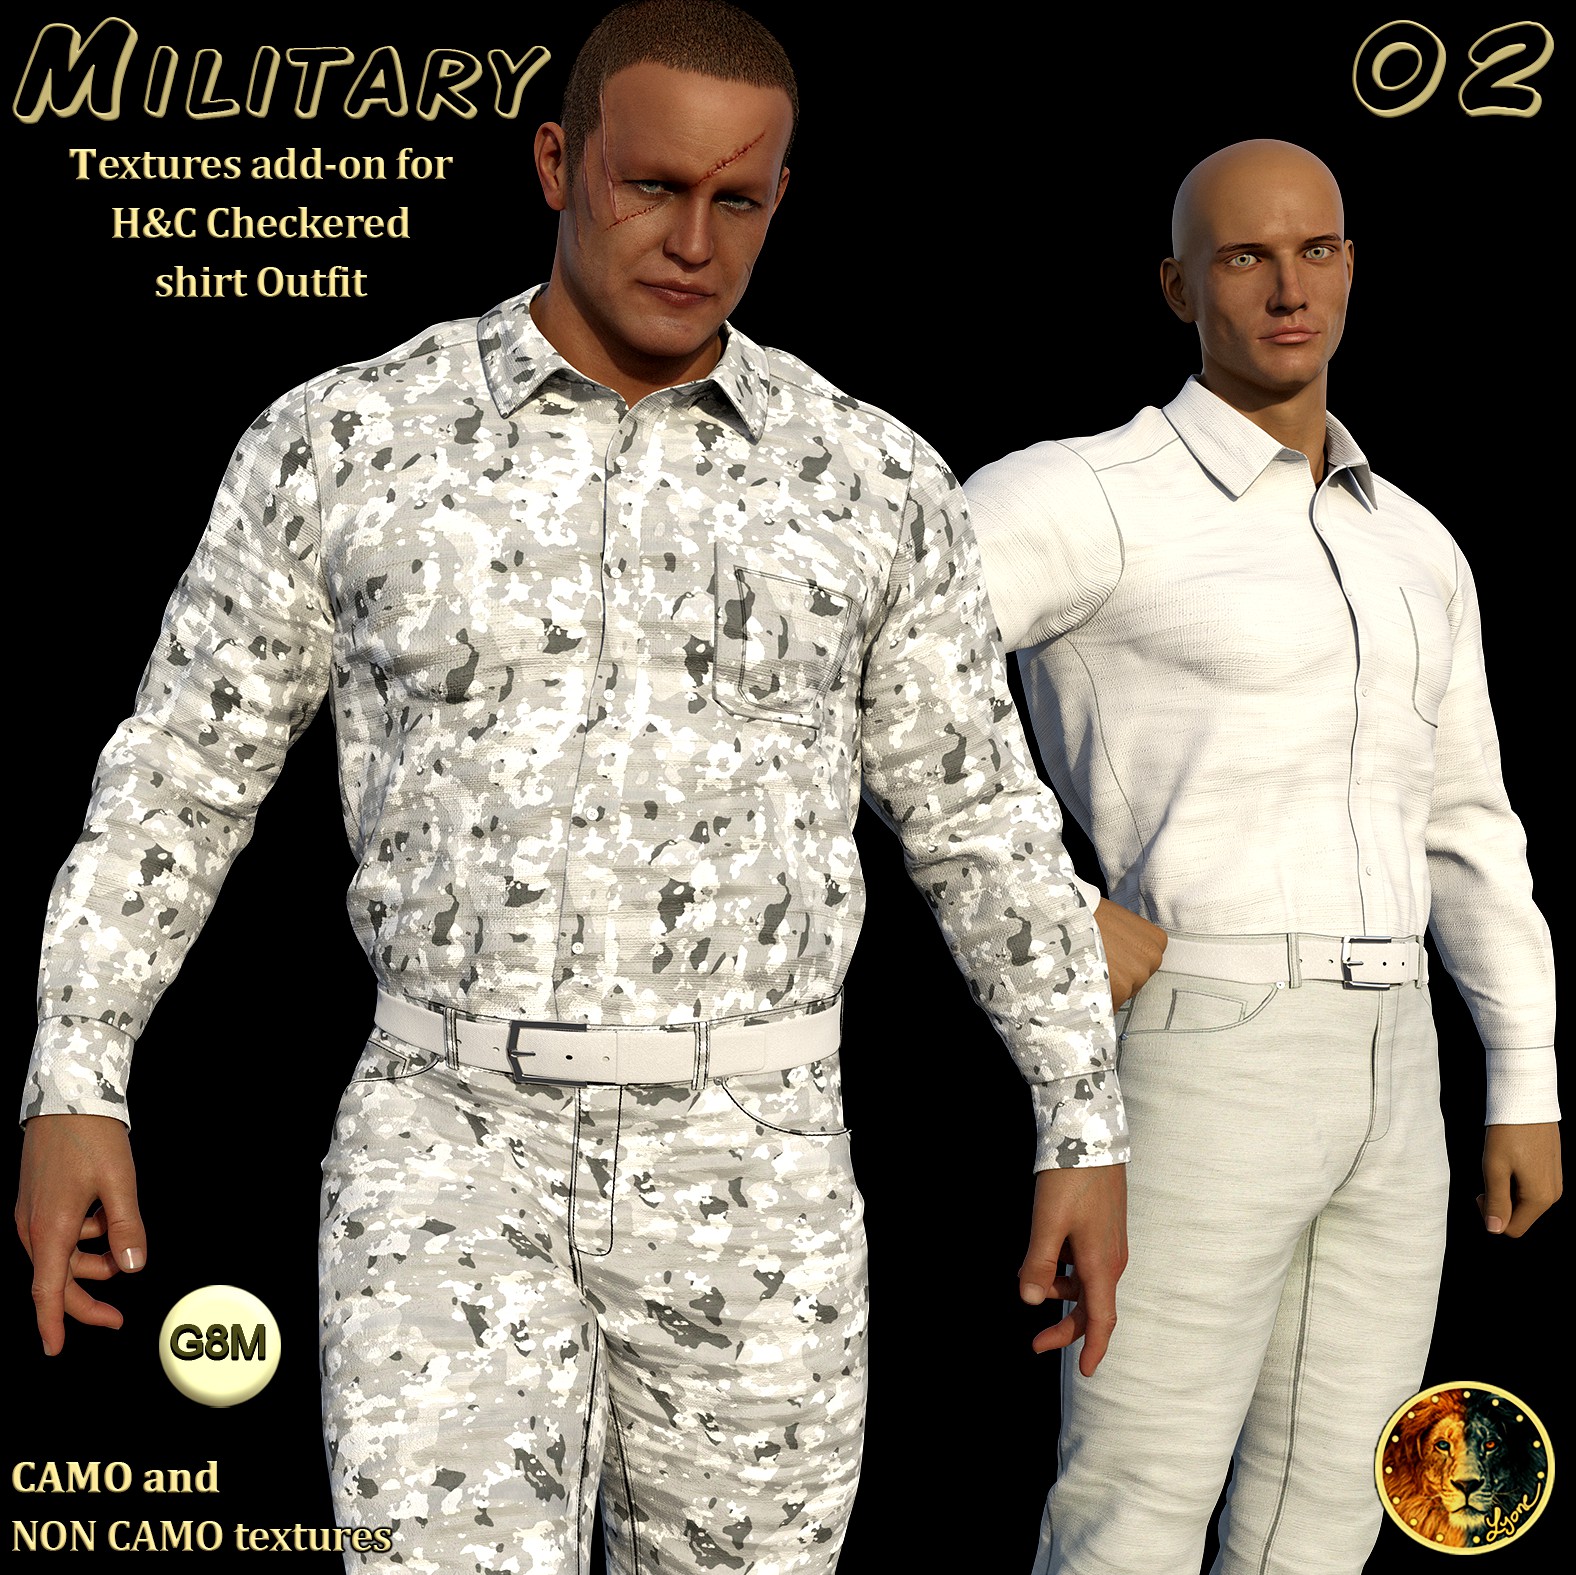 Military 02 for H&C Checkered Shirt Outfit for G8M